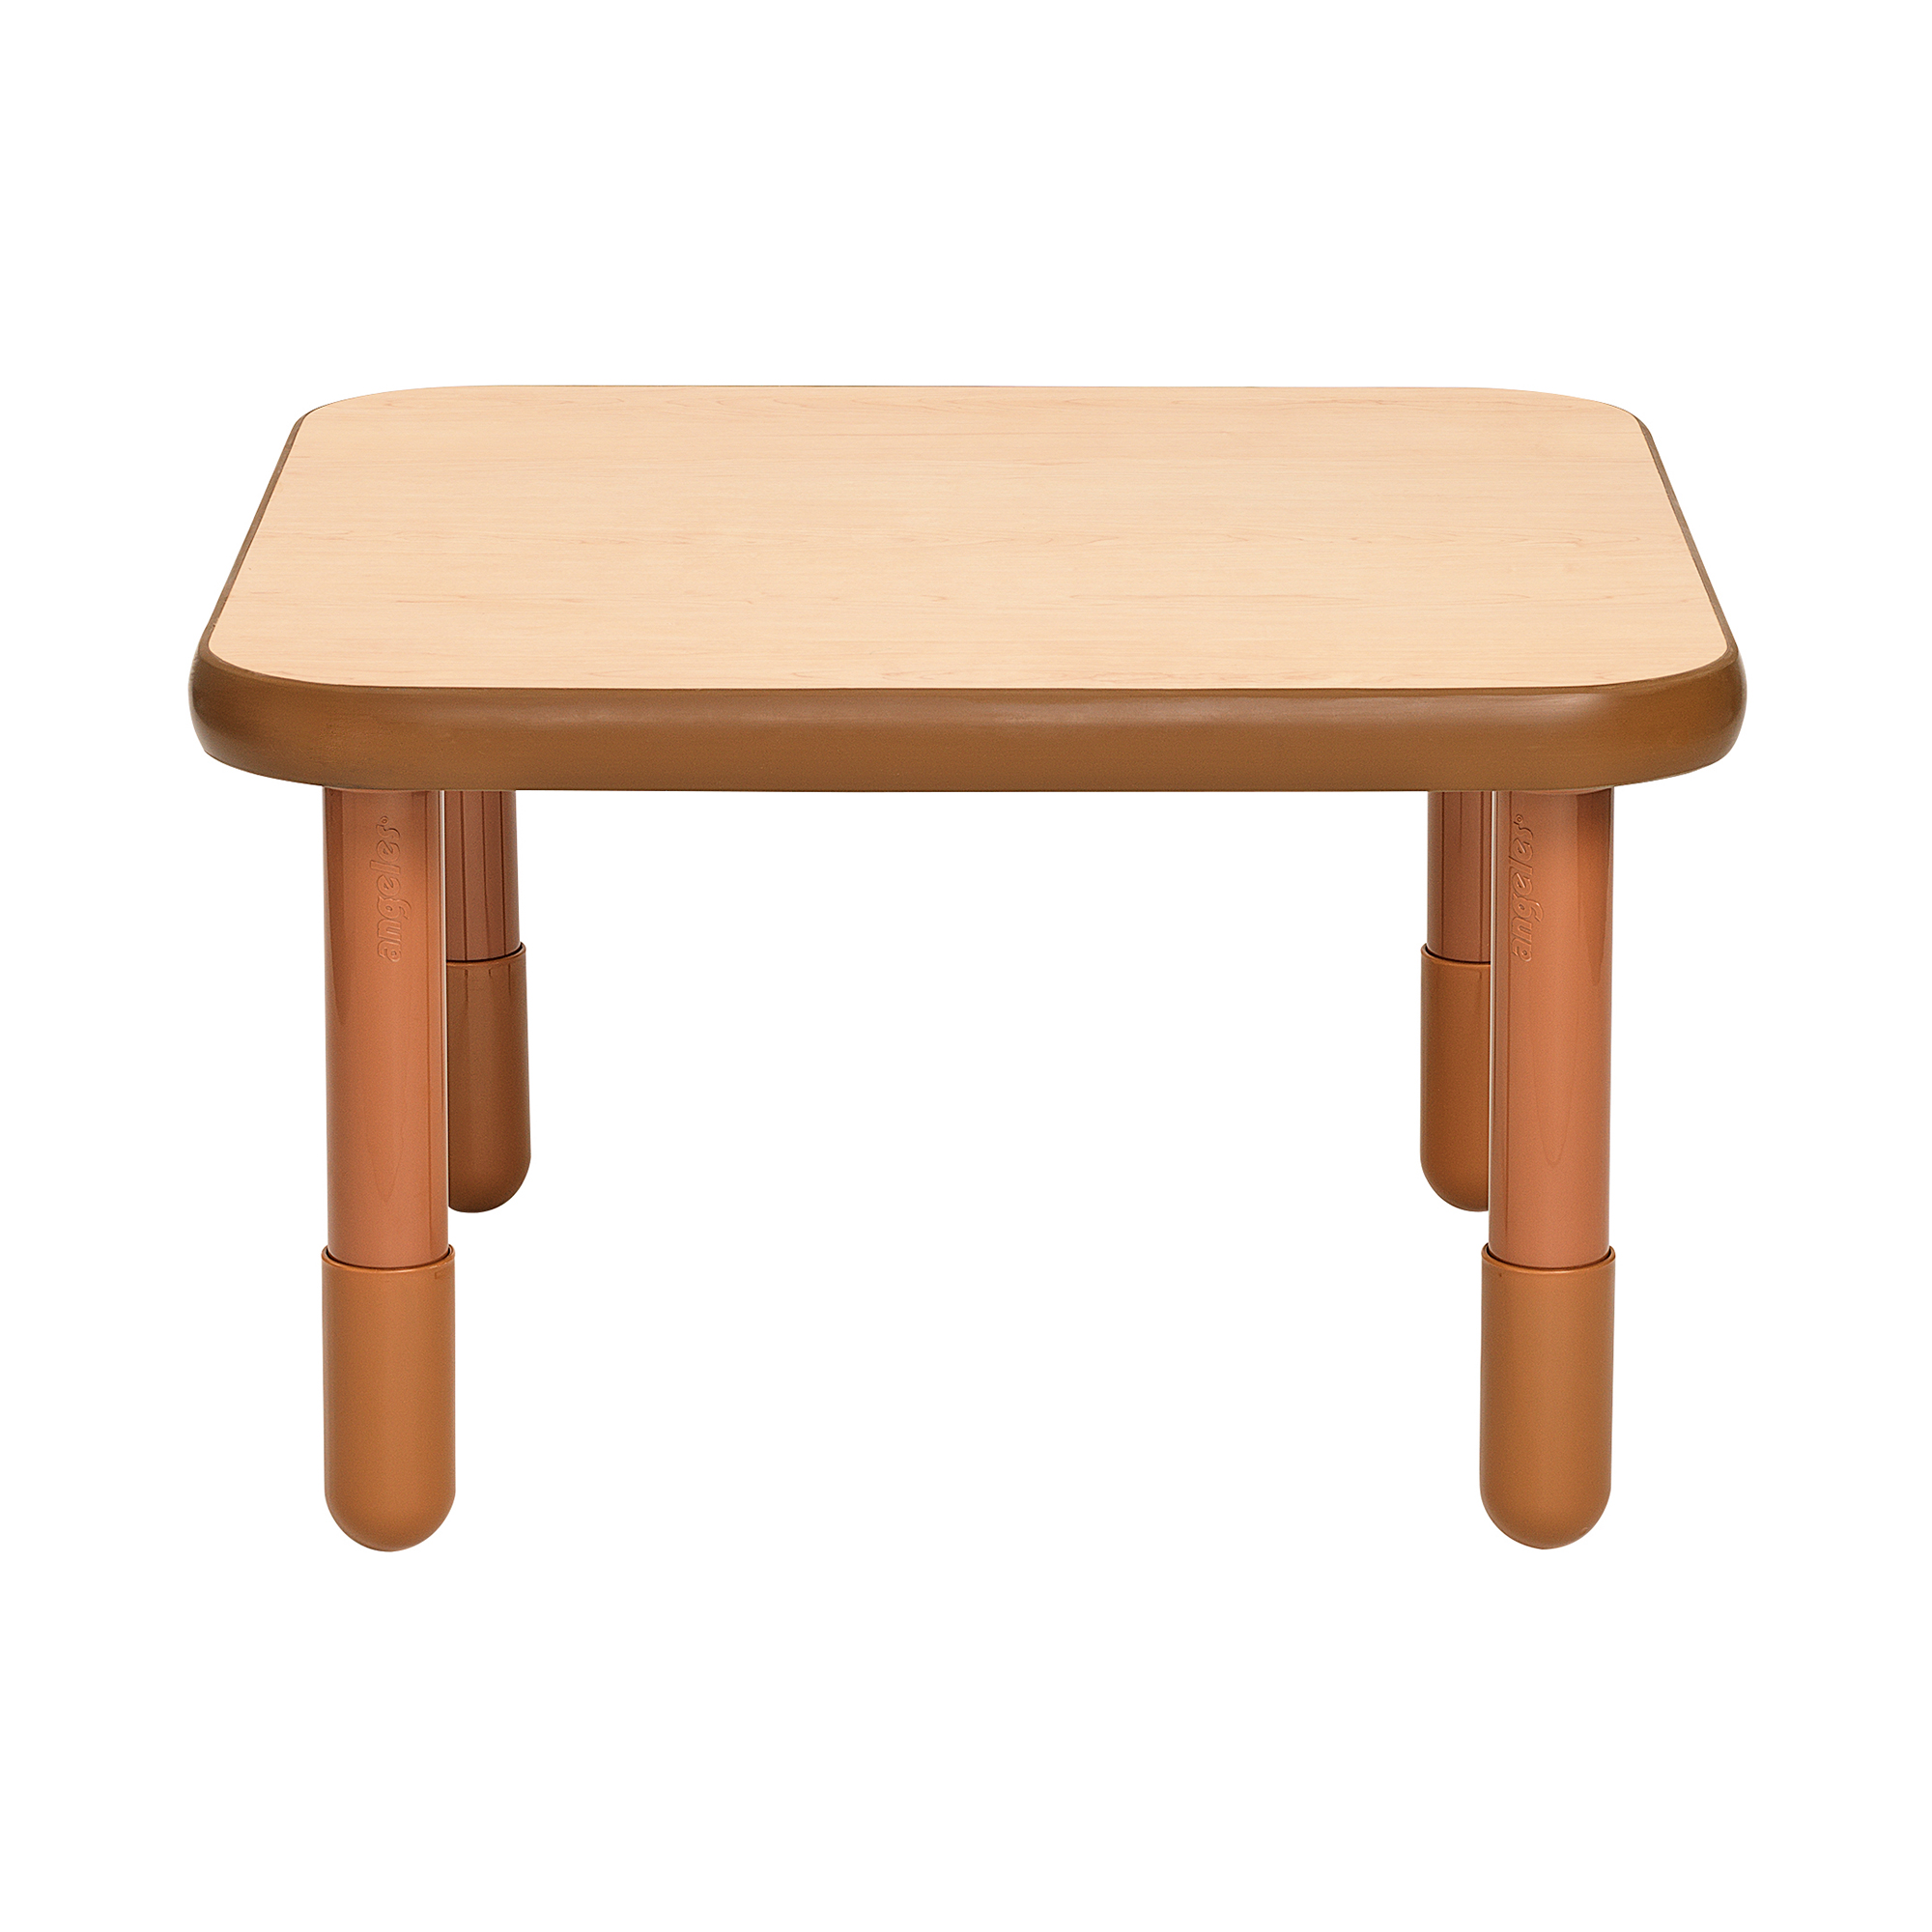 BaseLine® 76 cm  Square Table - Natural Wood with 45,5 cm  Legs